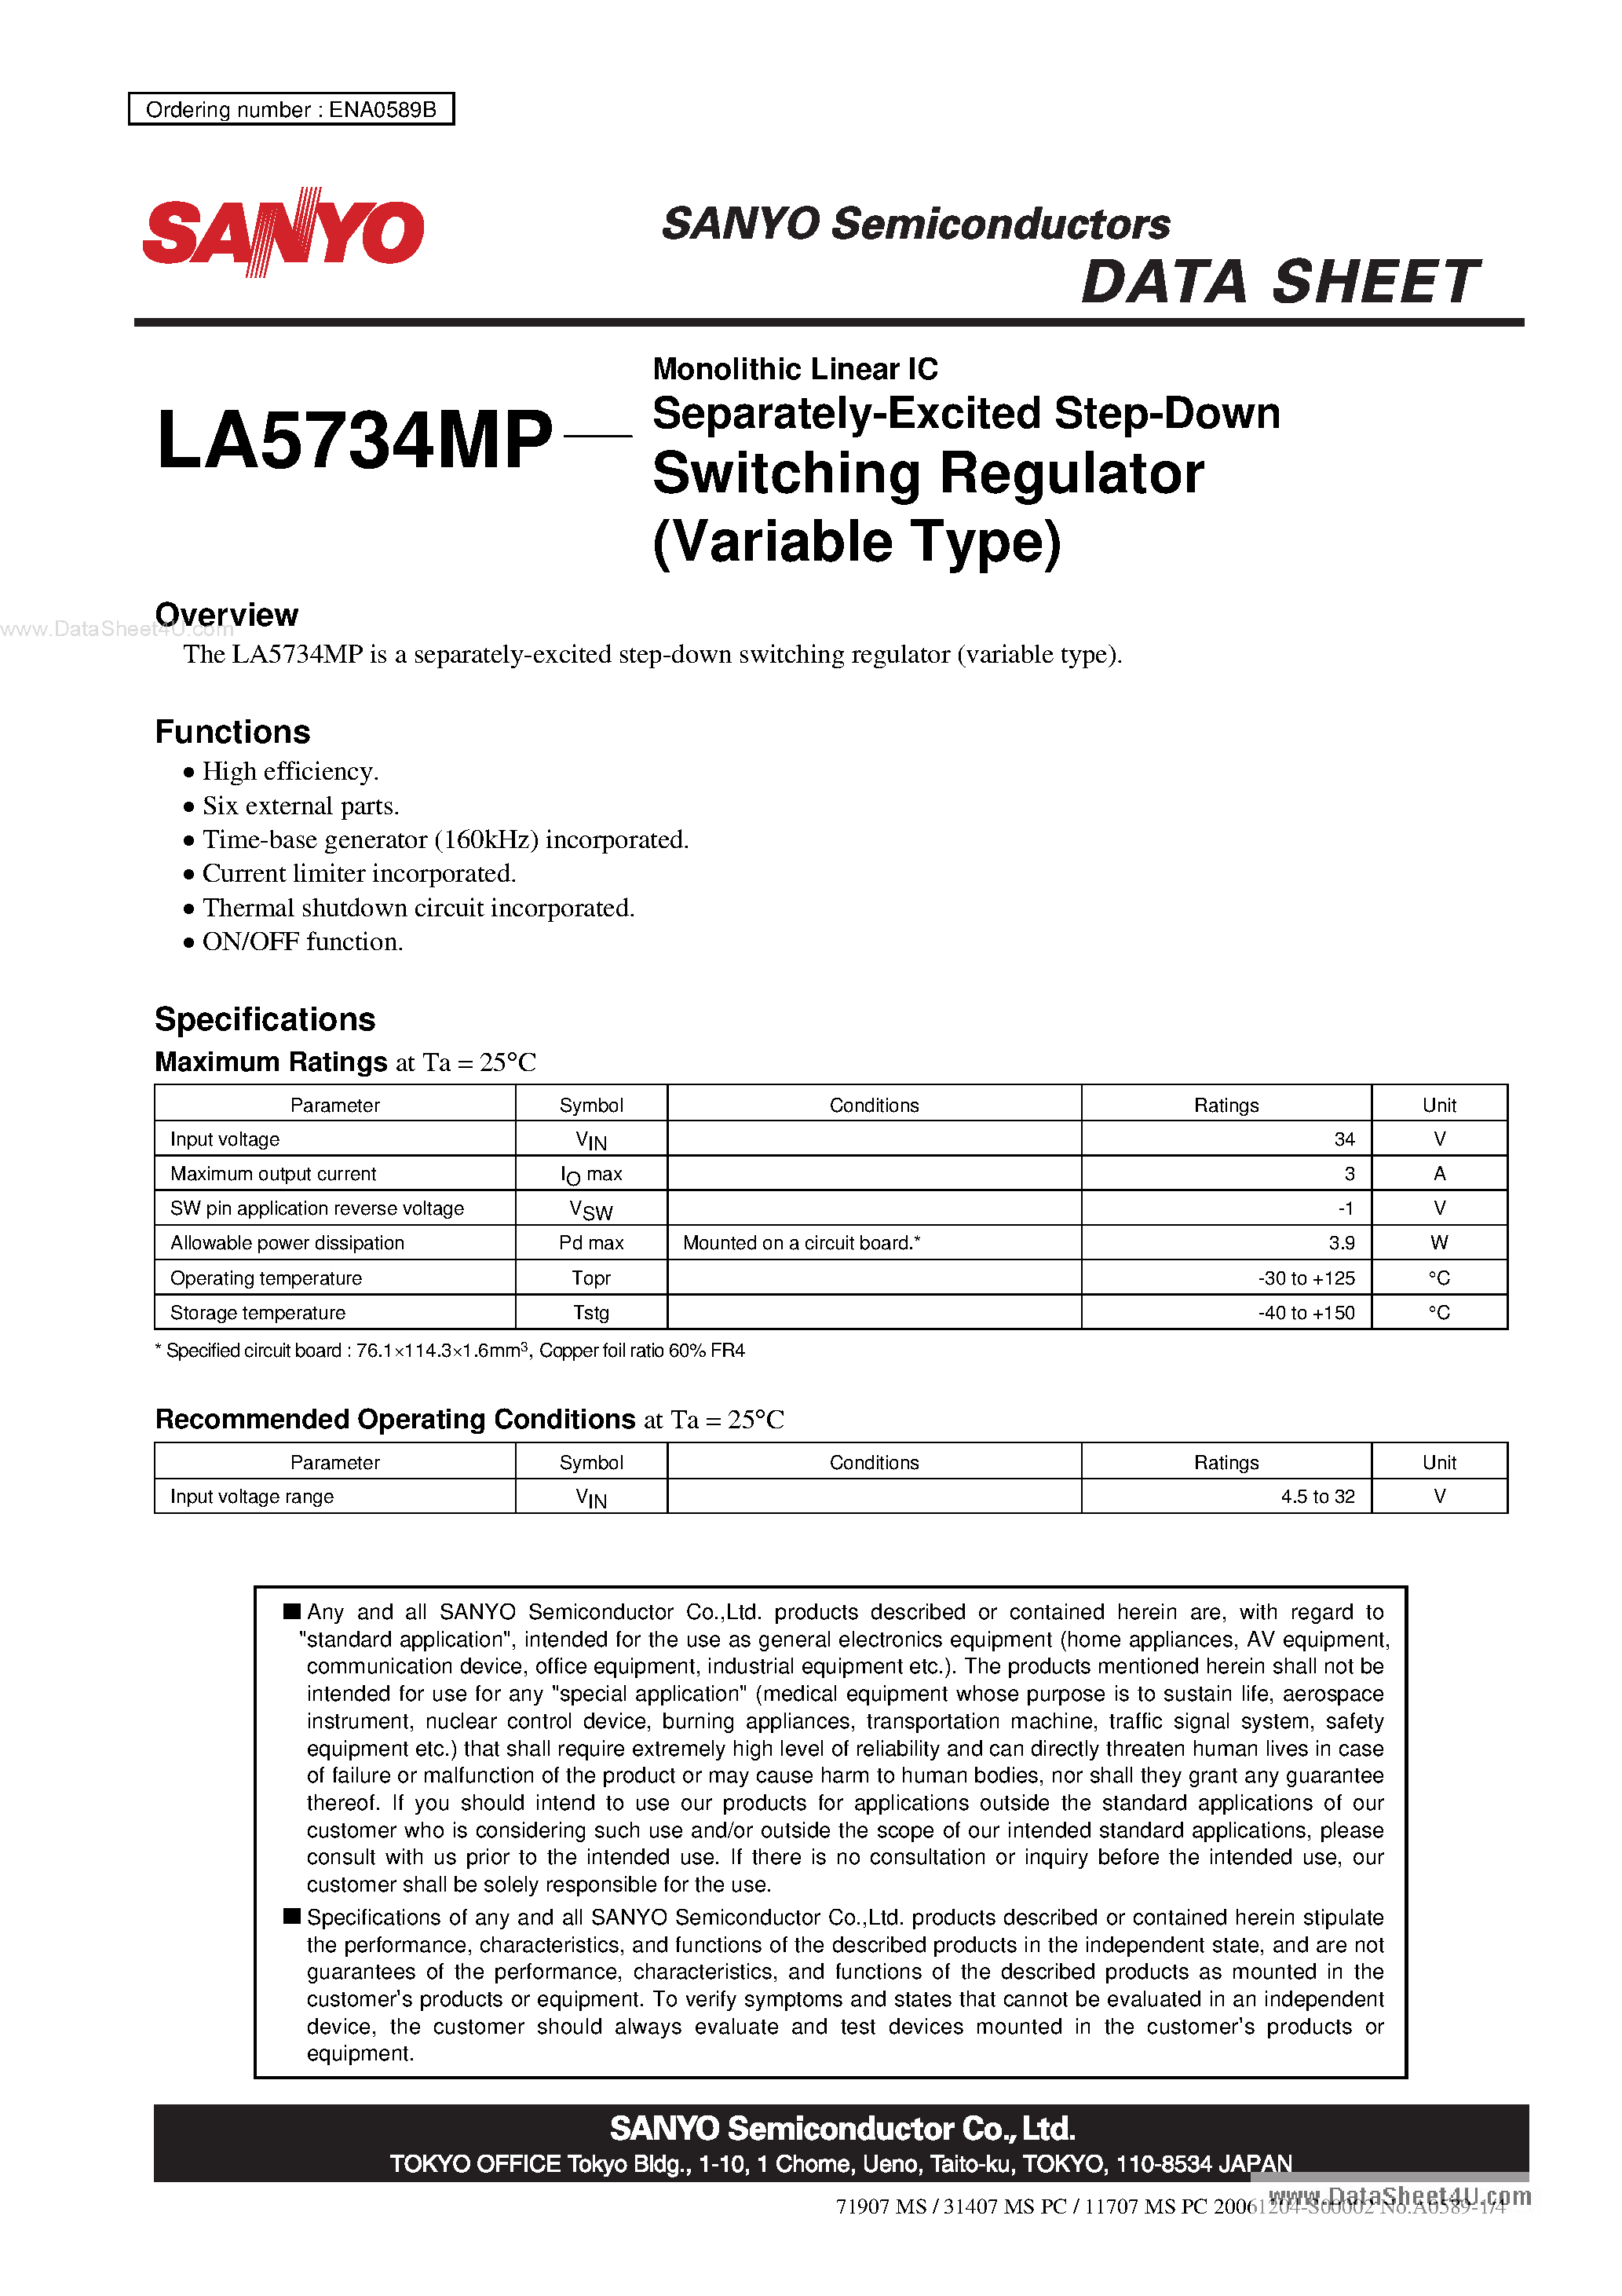 Datasheet LA5734MP - Monolithic Linear IC Separately-Excited Step-Down Switching Regulator page 1